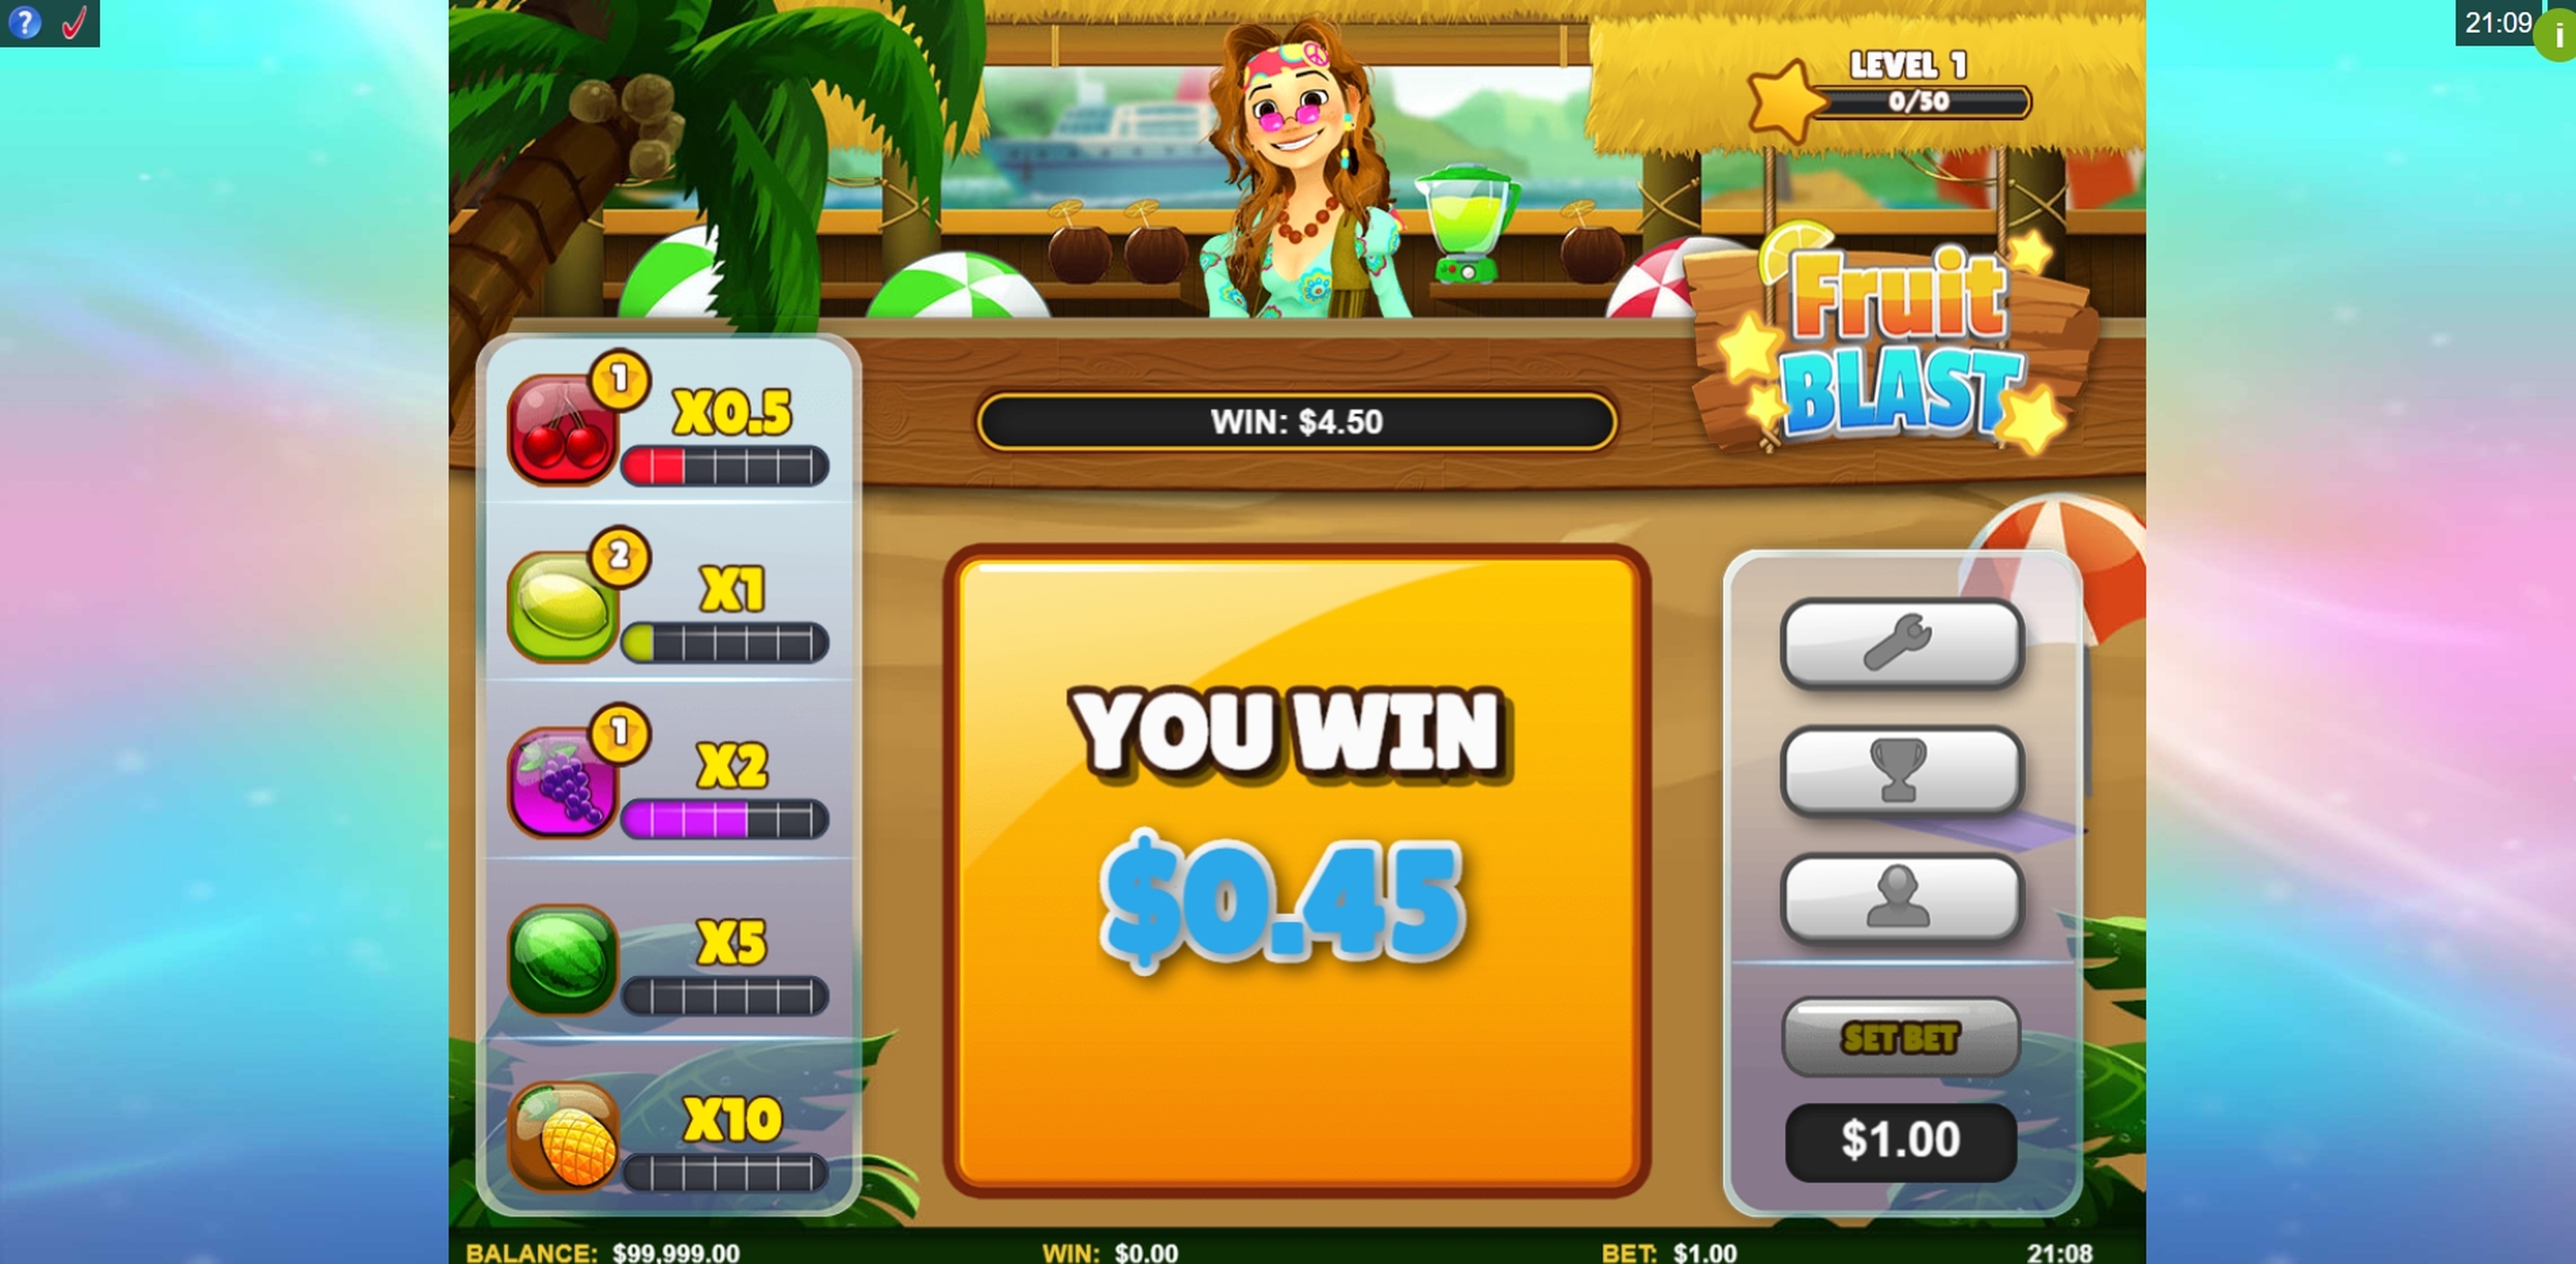 Win Money in Fruit Blast Free Slot Game by Skillzzgaming